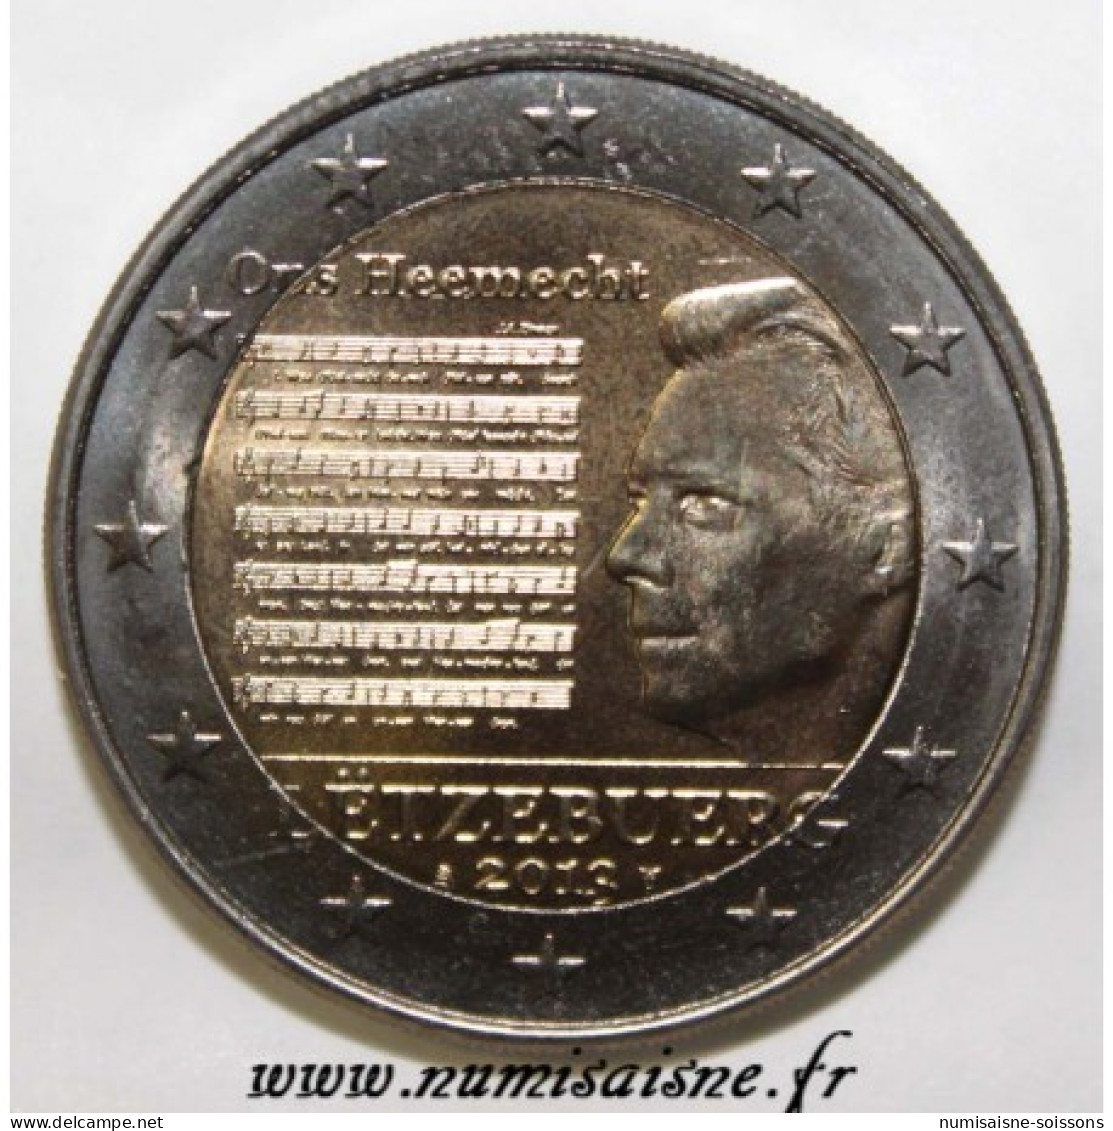 LUXEMBOURG - 2 EURO 2013 - HYMNE NATIONAL LUXEMBOURGEOIS - SPL - Luxembourg